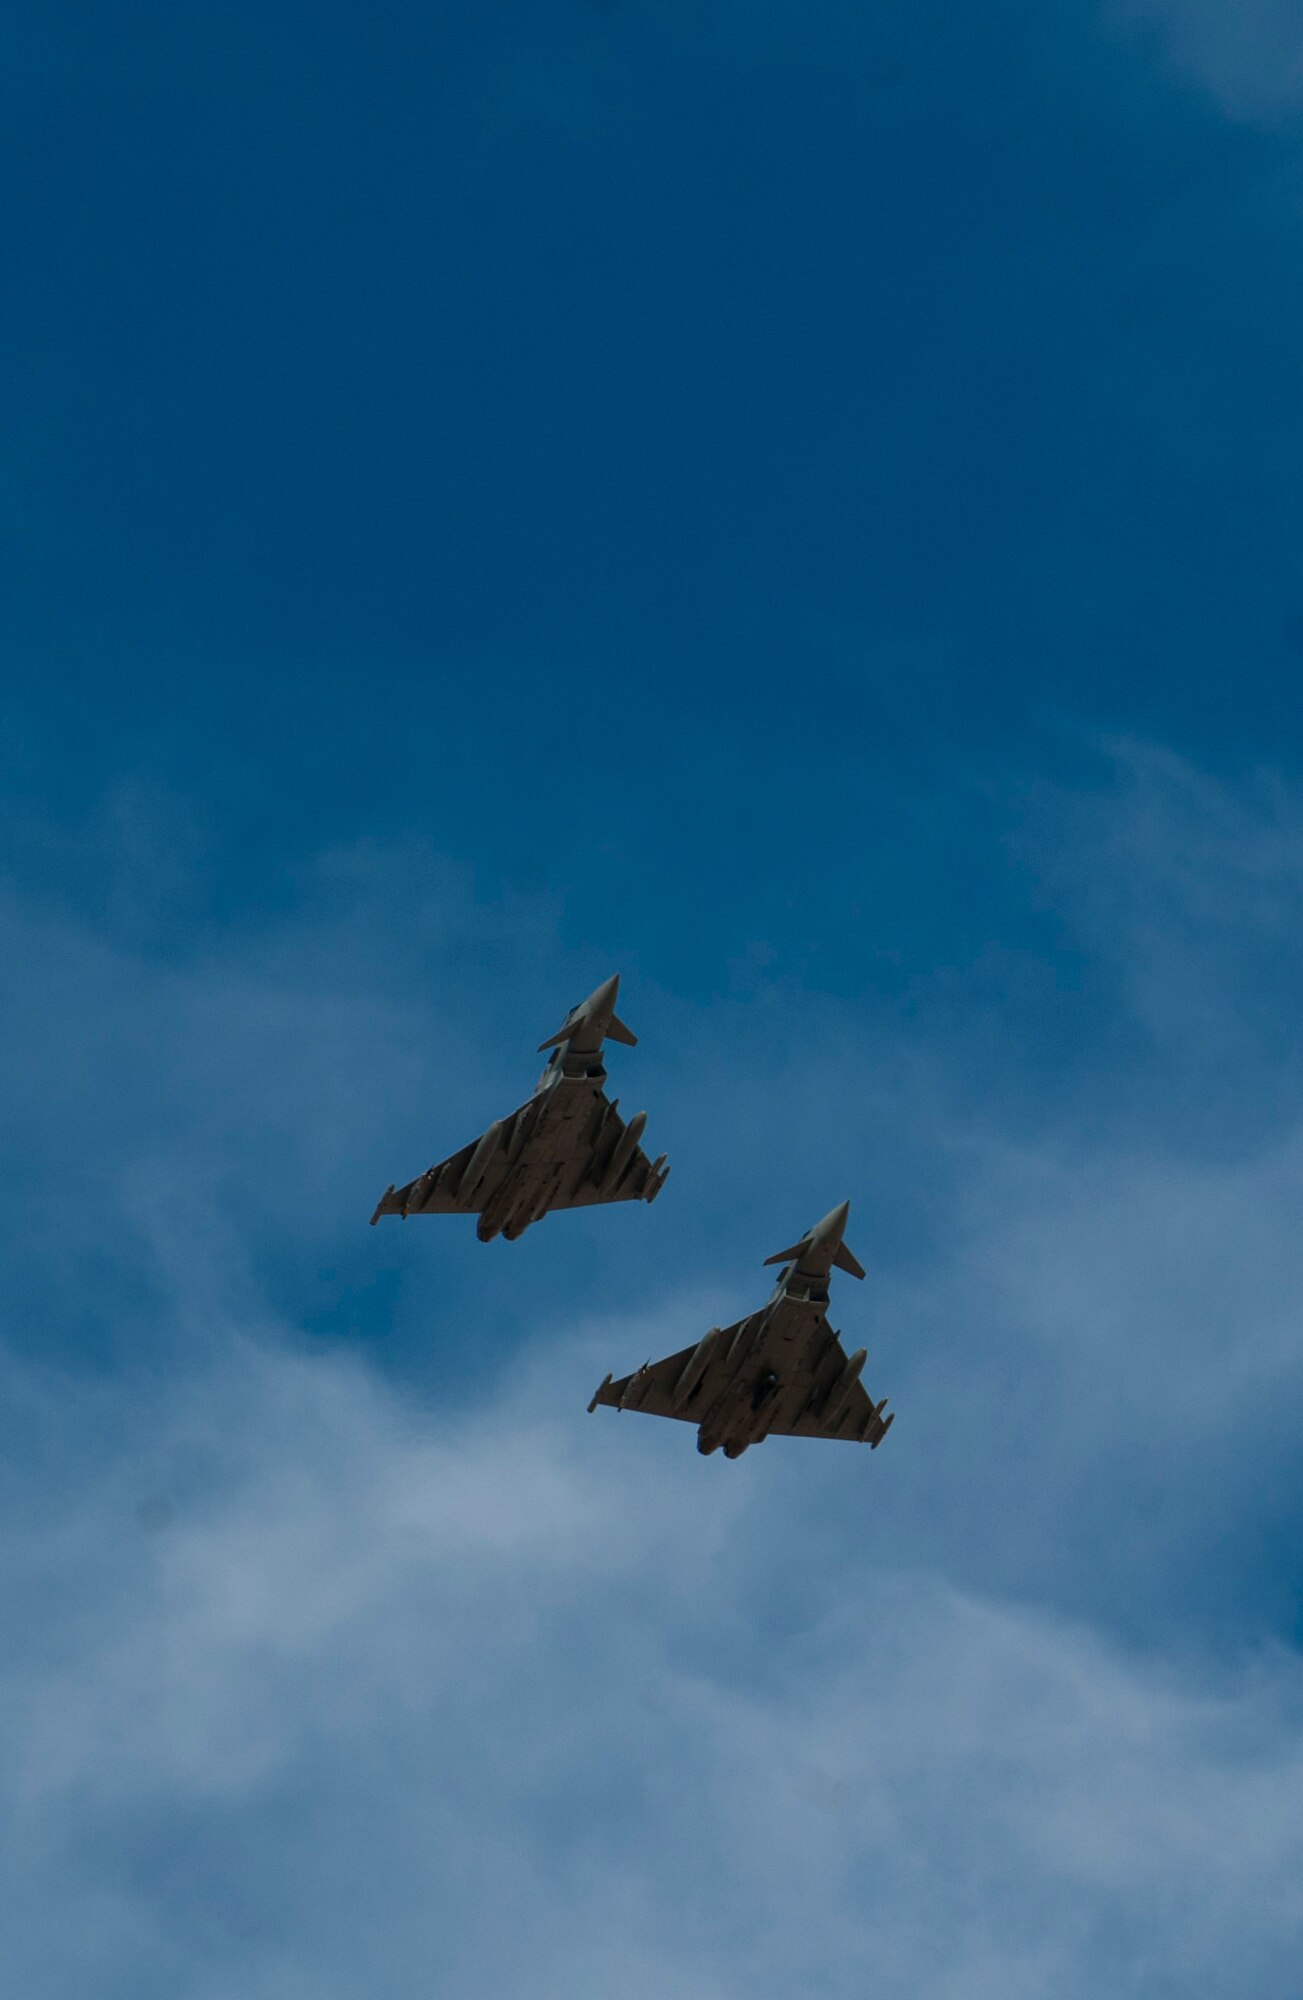 Two Royal Air Force Typhoon FGR4s assigned to 1 (Fighter) Squadron, RAF Lossiemouth, Scotland, prepare to land during Red Flag 15-1 at Nellis Air Force Base, Nev., Feb. 6, 2015. All four branches of the U.S. military and air forces from allied nations have participated in Red Flag. The training is conducted to familiarize forces to work together in future real-world operations. (U.S. Air Force photo by Senior Airman Thomas Spangler)